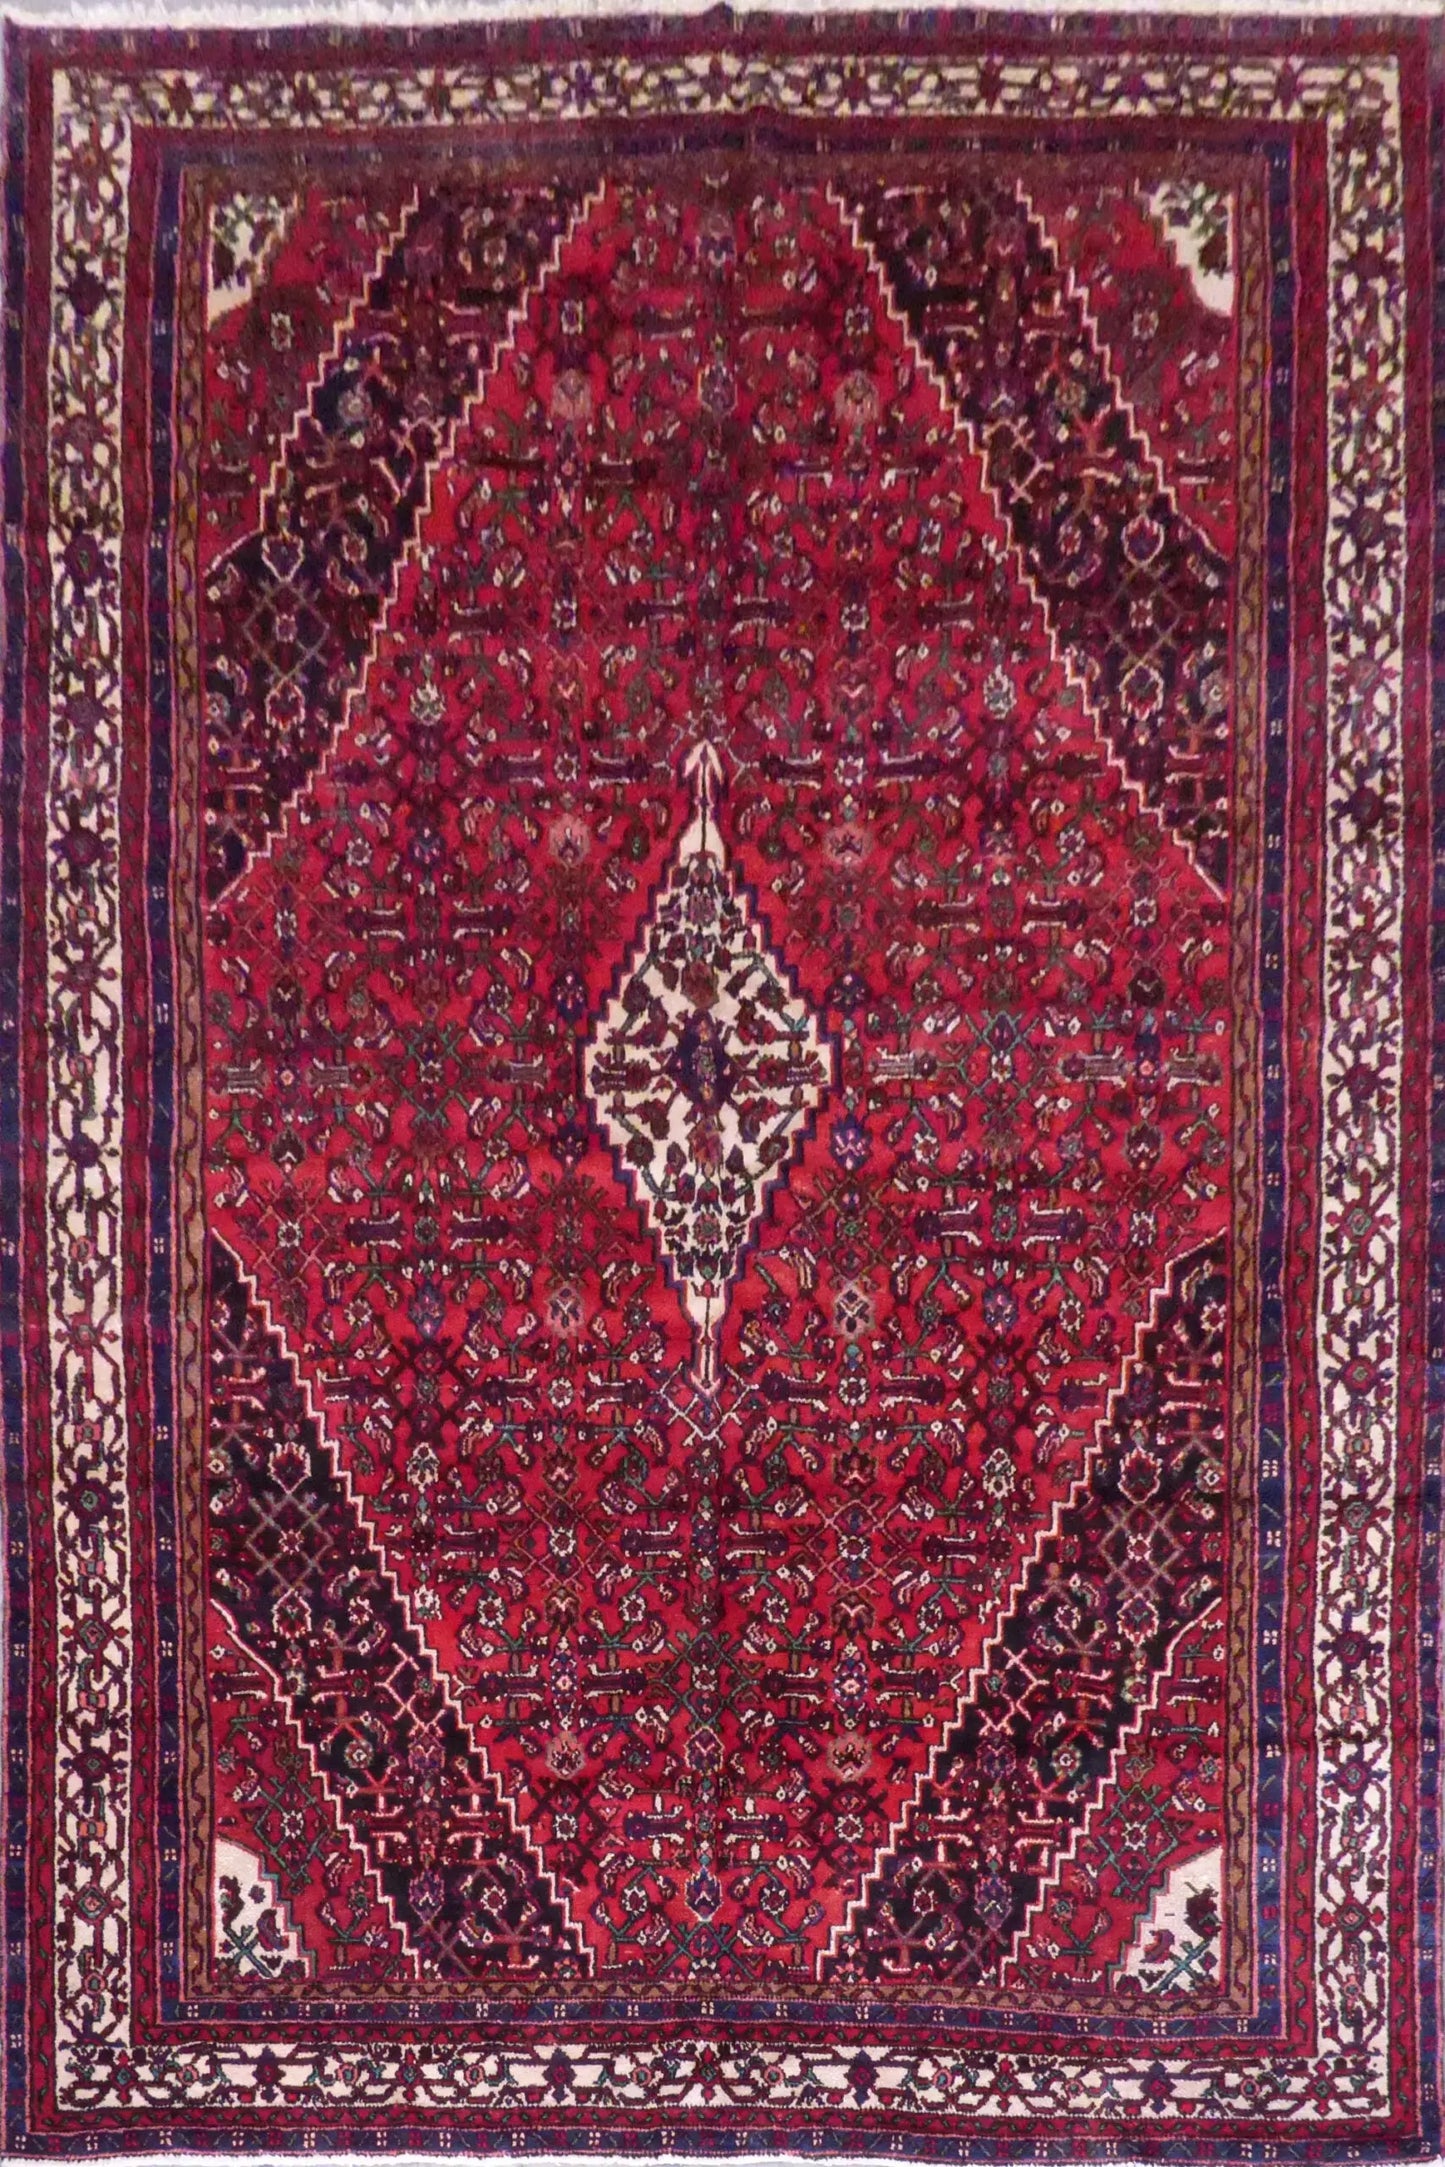 Hand-Knotted Persian Wool Rug _ Luxurious Vintage Design, 8'3" x 12', Artisan Crafted